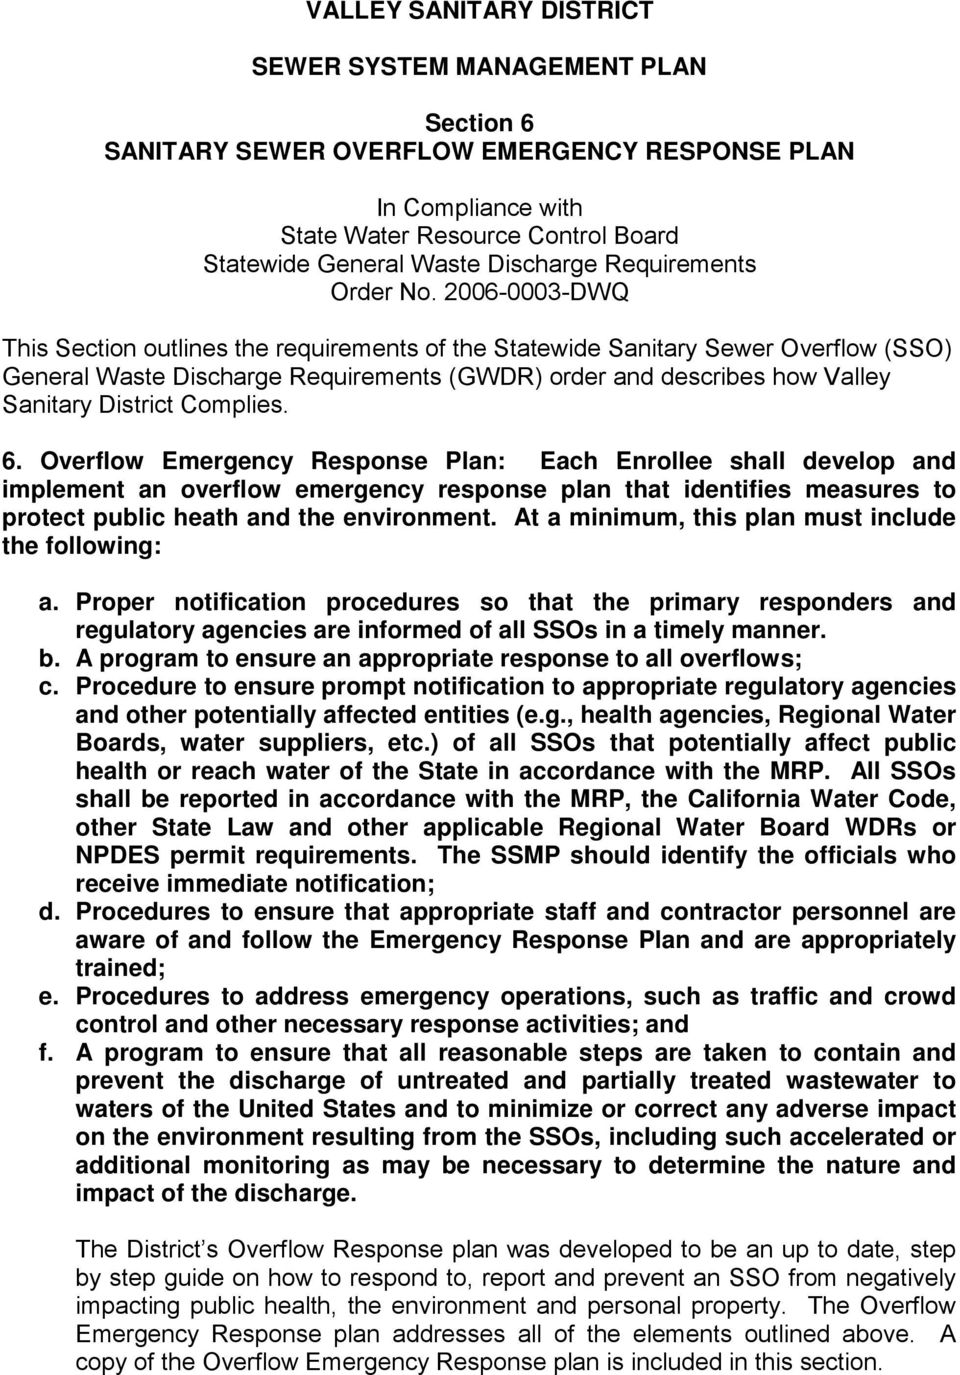 2006-0003-DWQ This Section outlines the requirements of the Statewide Sanitary Sewer Overflow (SSO) General Waste Discharge Requirements (GWDR) order and describes how Valley Sanitary District